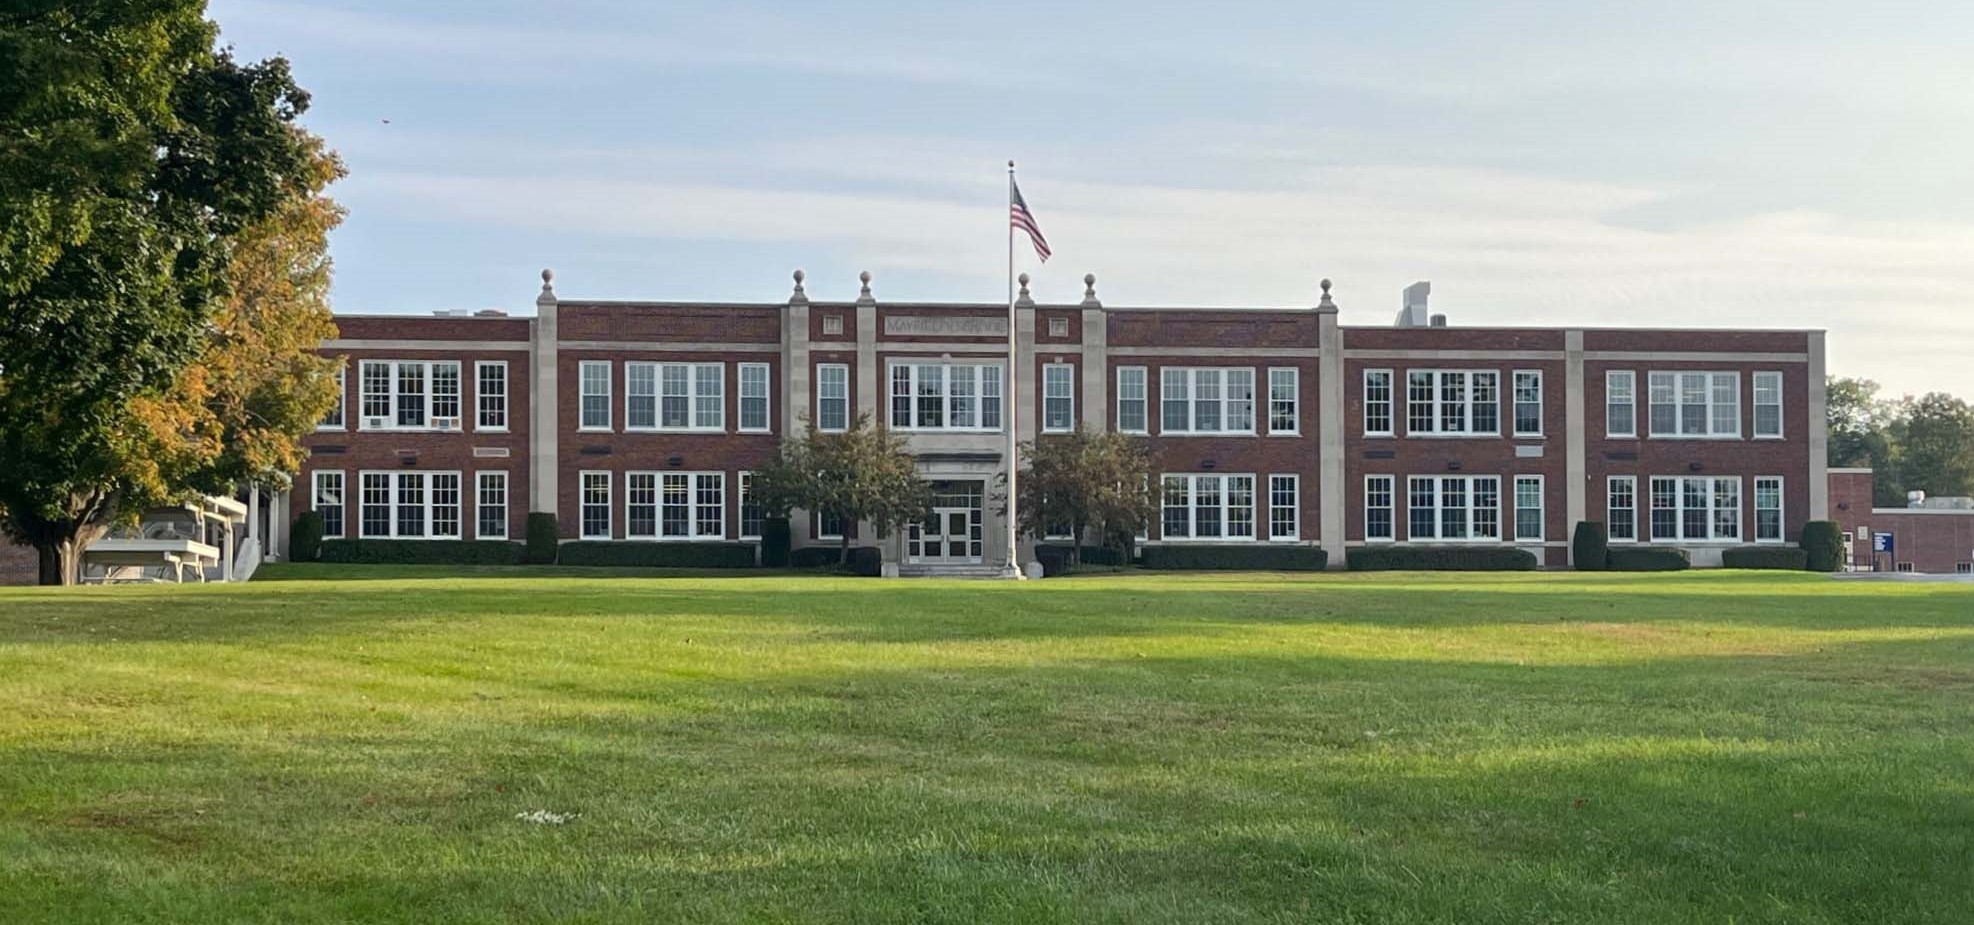 outside of brick school building on a green lawn with an American flag and tree on the left hand side